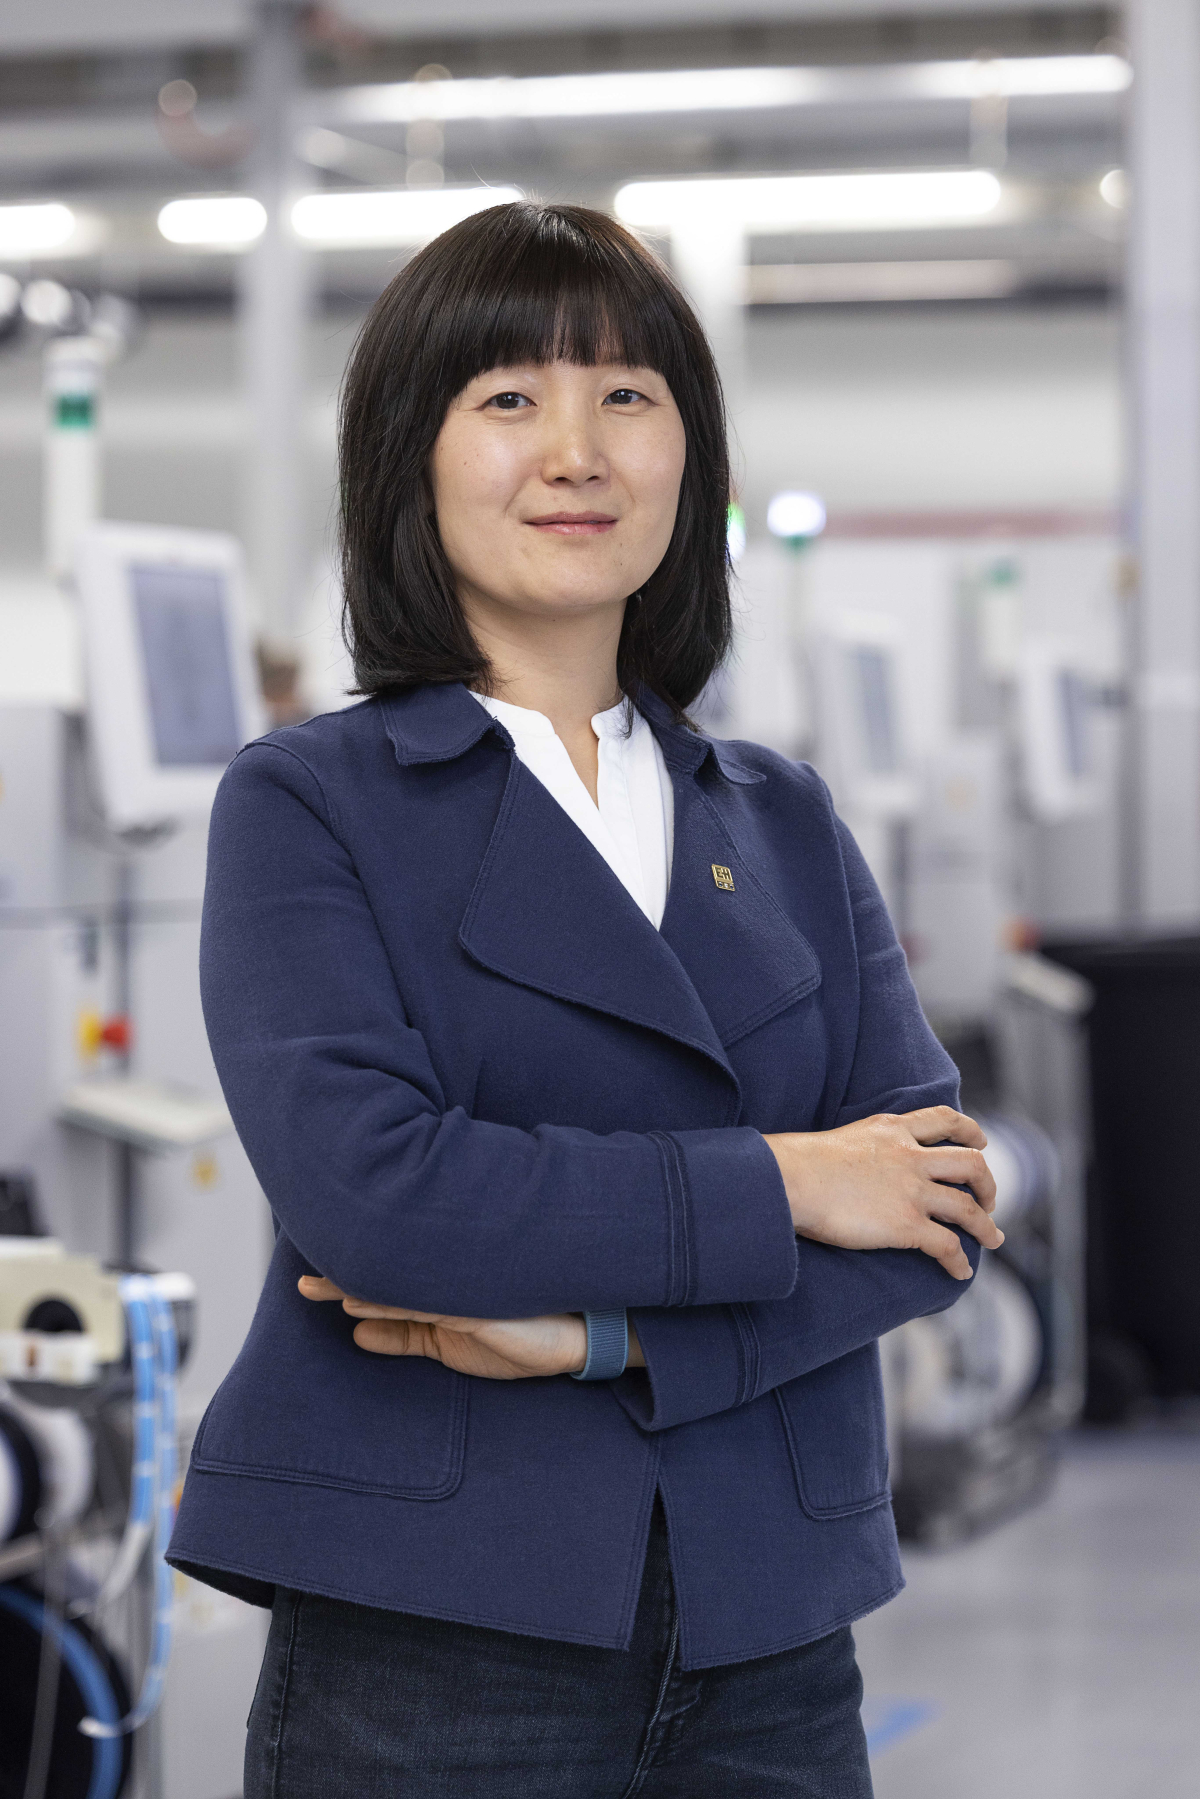 Strategic purchaser Wenting Zhang-Kilian procures electronic components with her team and heads up a working group that deals with impending bottlenecks.